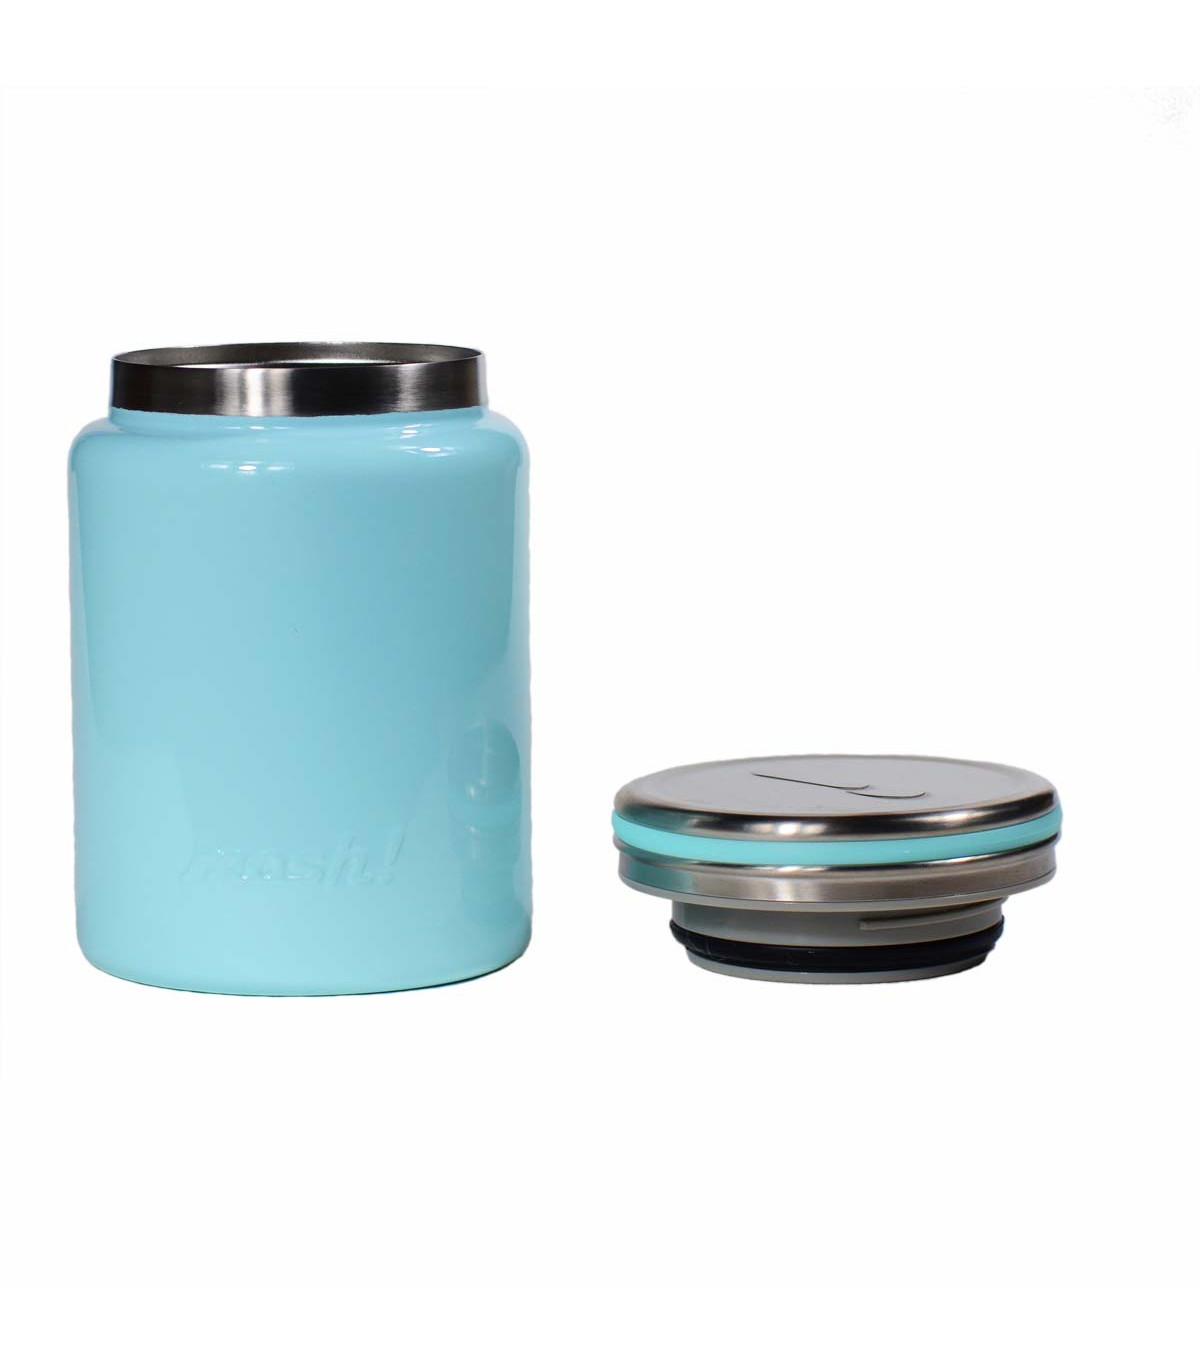 https://takaterra.com/3806-superlarge_default/insulated-food-container-stainless-steel-blue-mosh.jpg